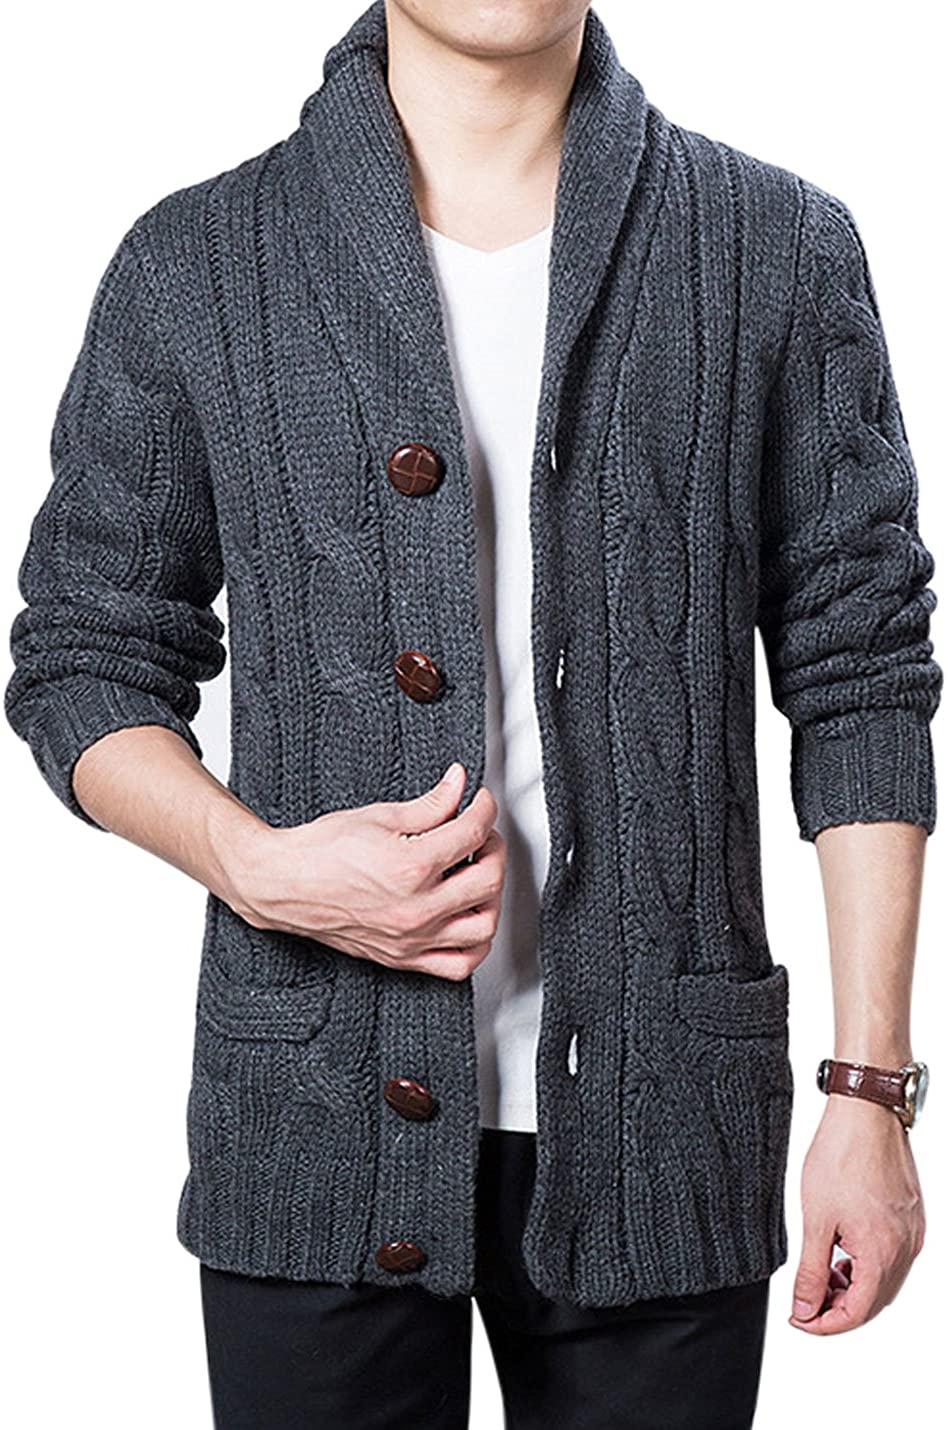 Yeokou Men's Casual Slim Thick Knitted Shawl Collar Cardigan Sweaters ...